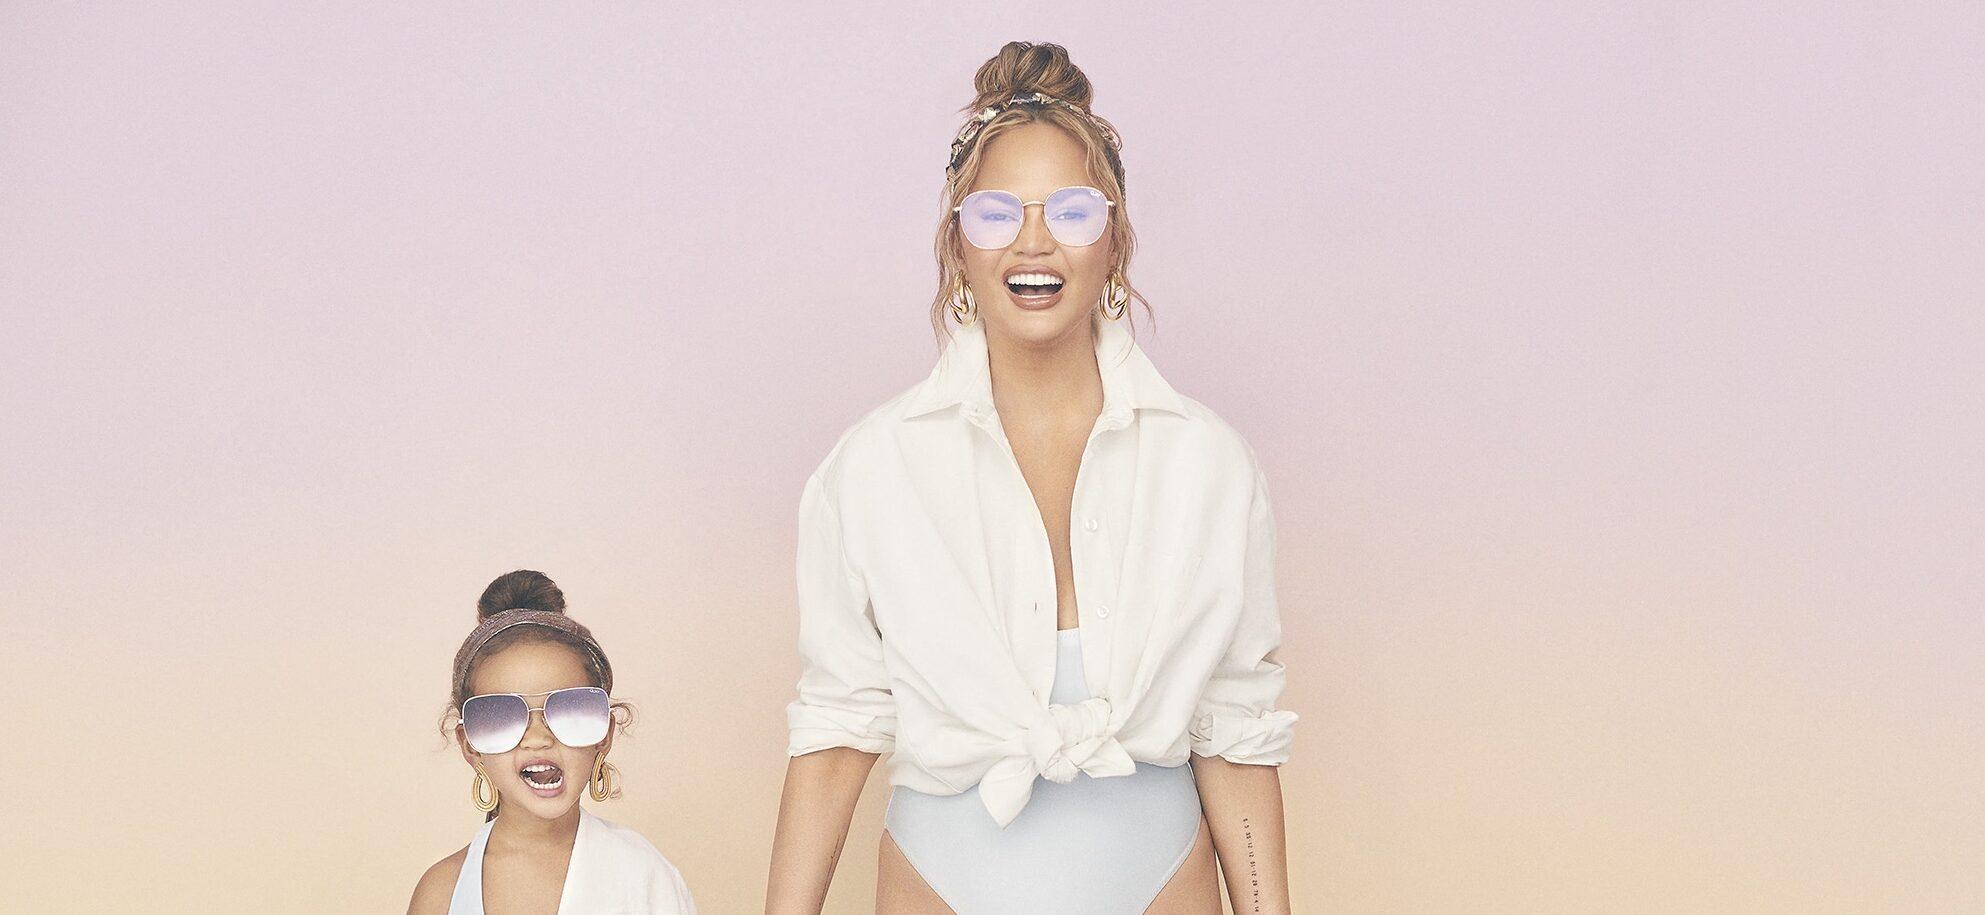 Chrissy Teigen’s Daughter Steps Into Her Cooking Shoes, Bakes The Perfect Cookies